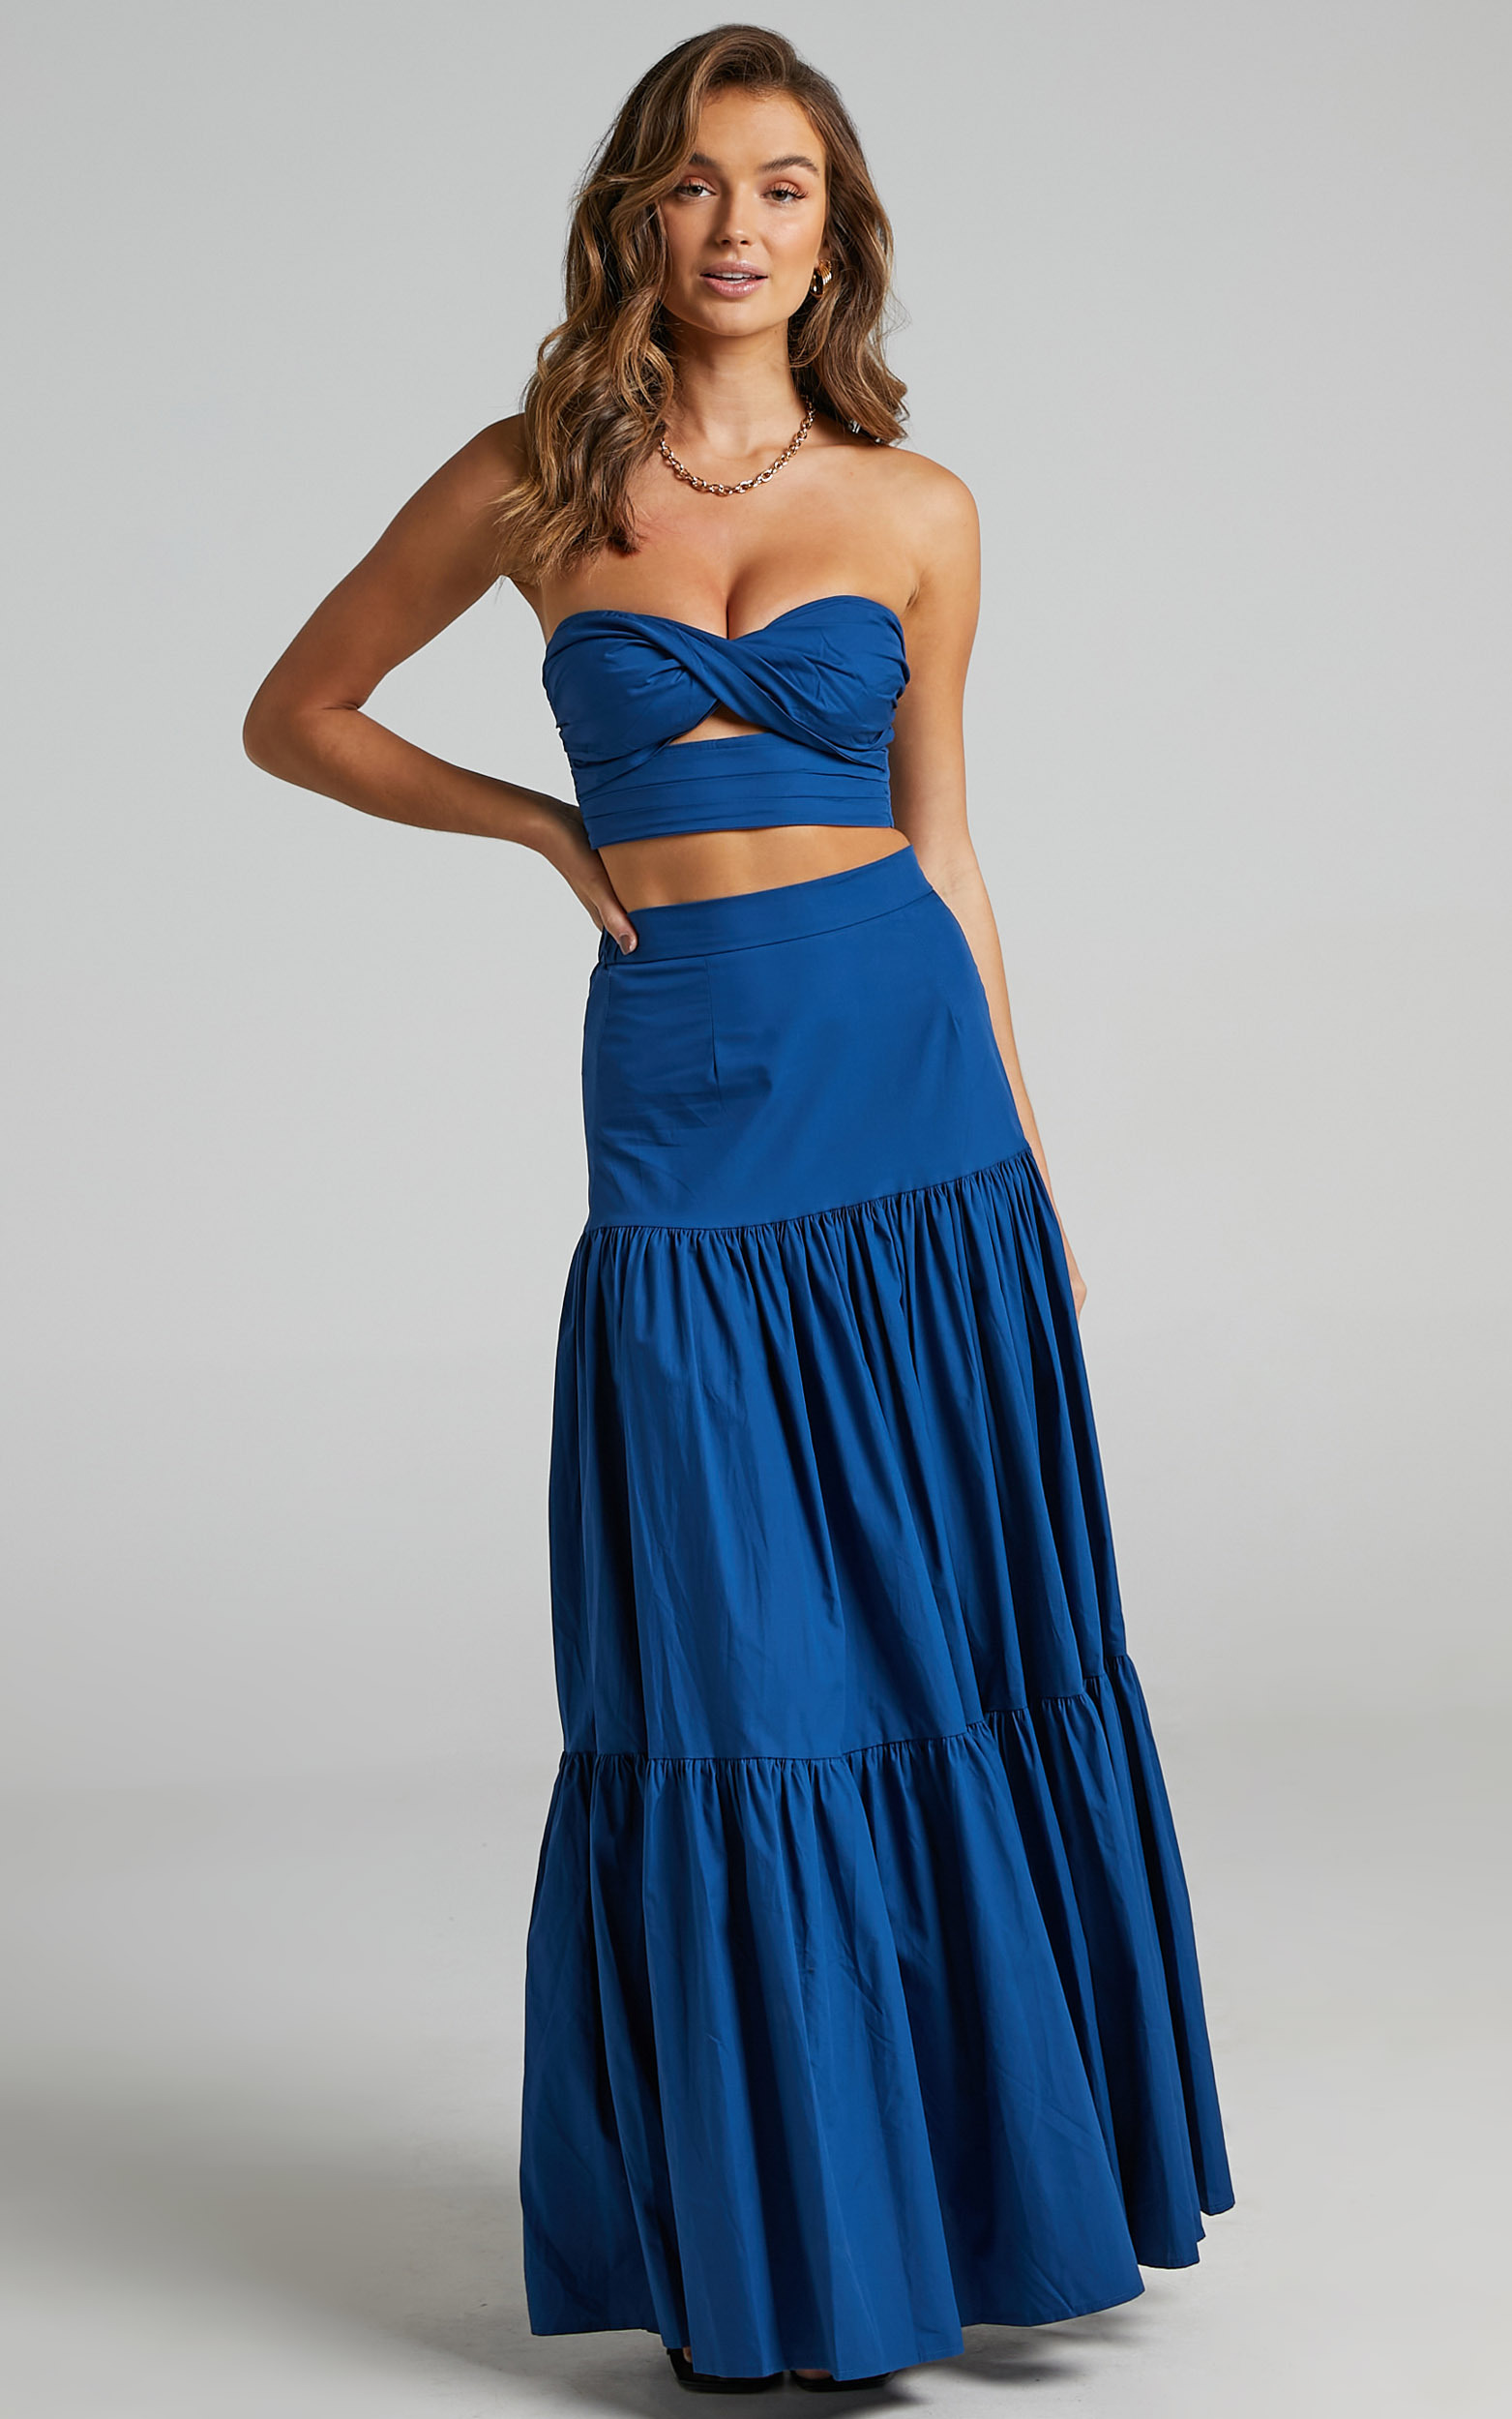 Runaway The Label - Ayla Maxi Skirt in Sapphire - L, BLU1, hi-res image number null